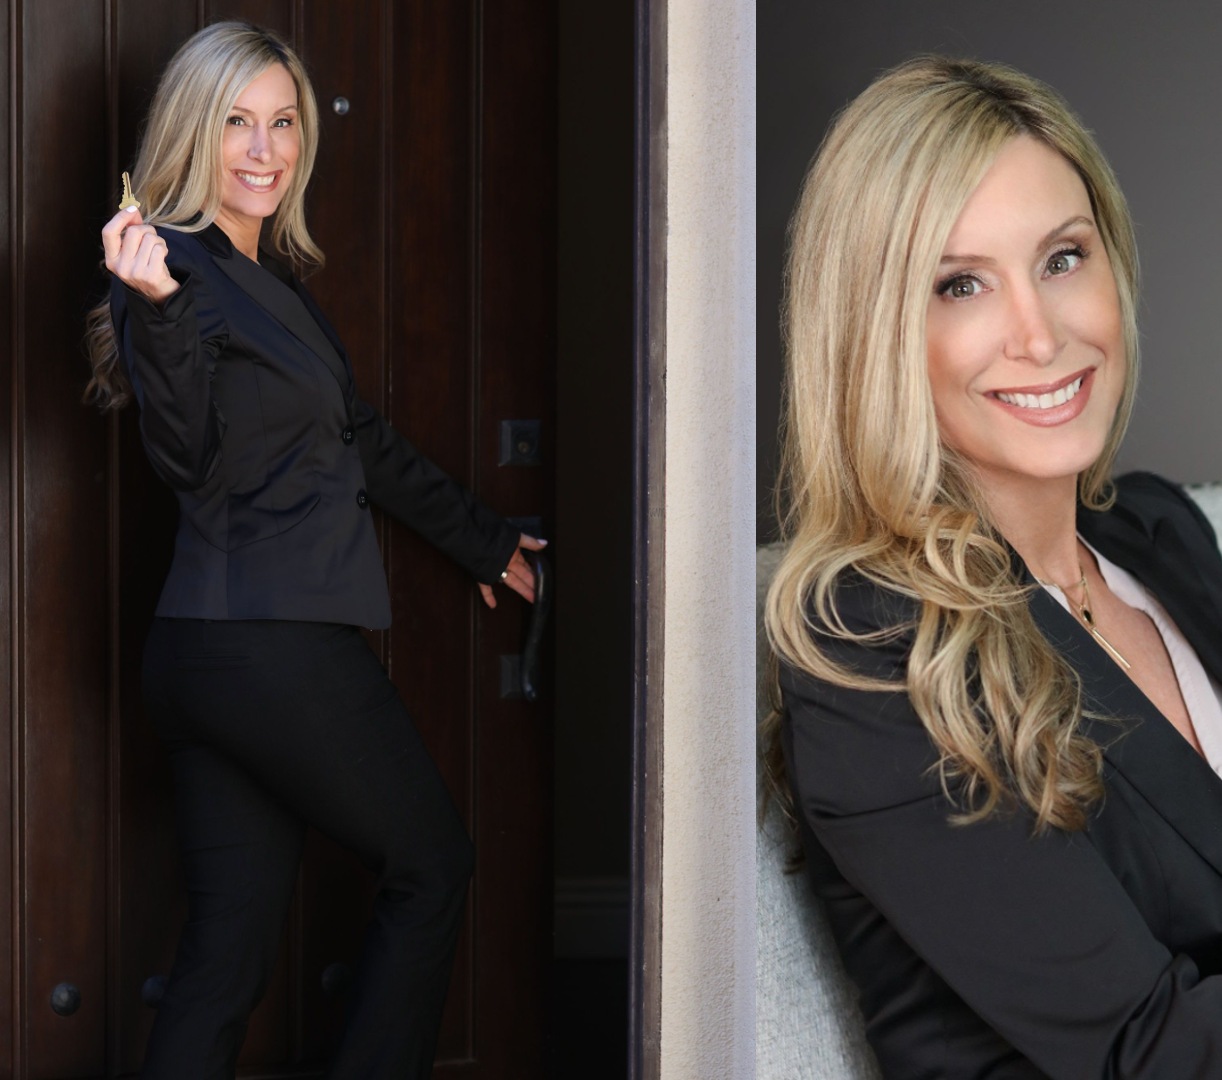 tracy sutherland miss tracy real estate agent interview on niteskape